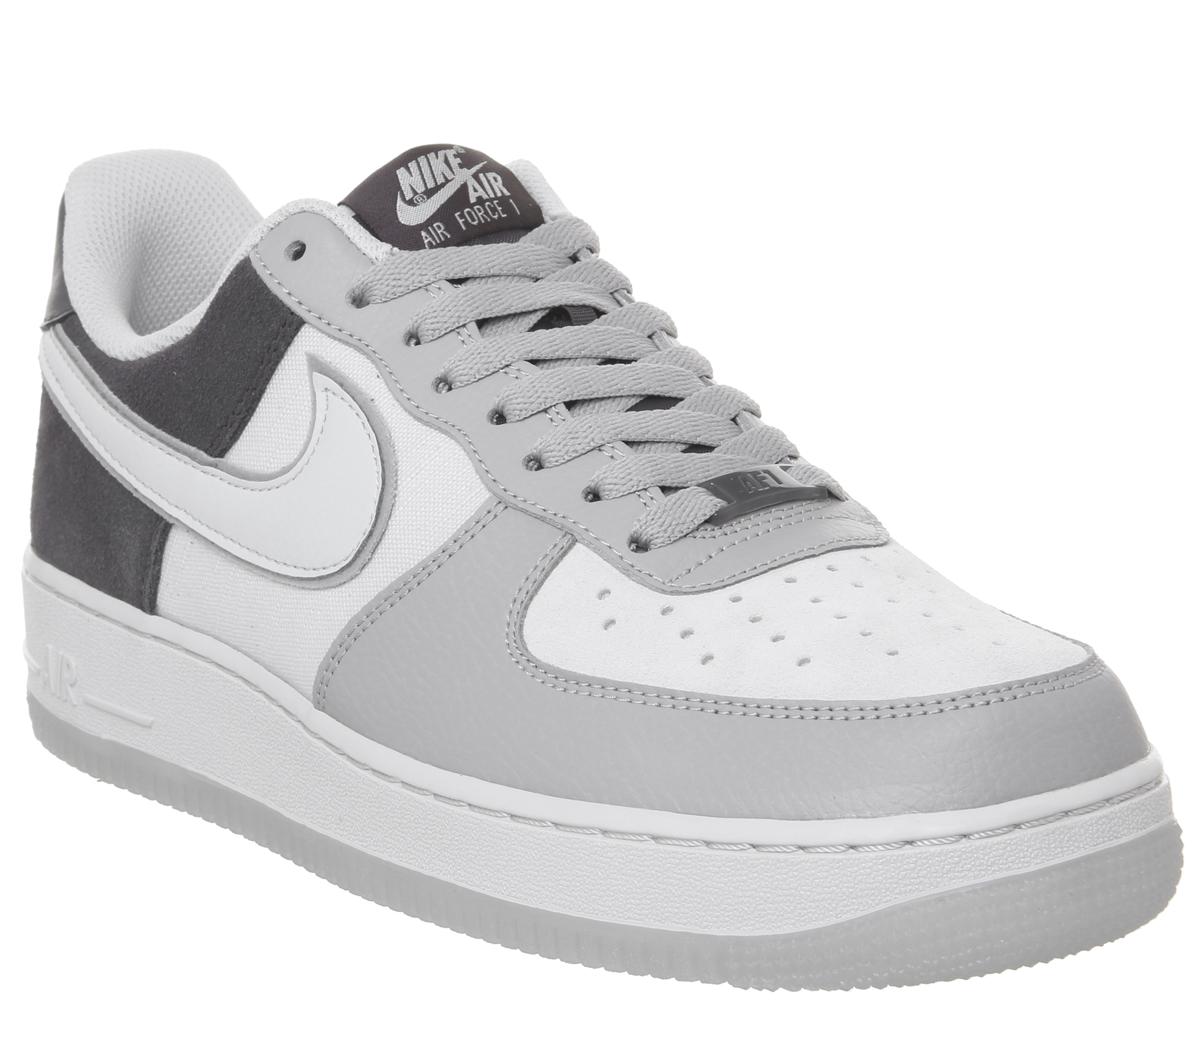 white & grey air force 1 lv8 trainers